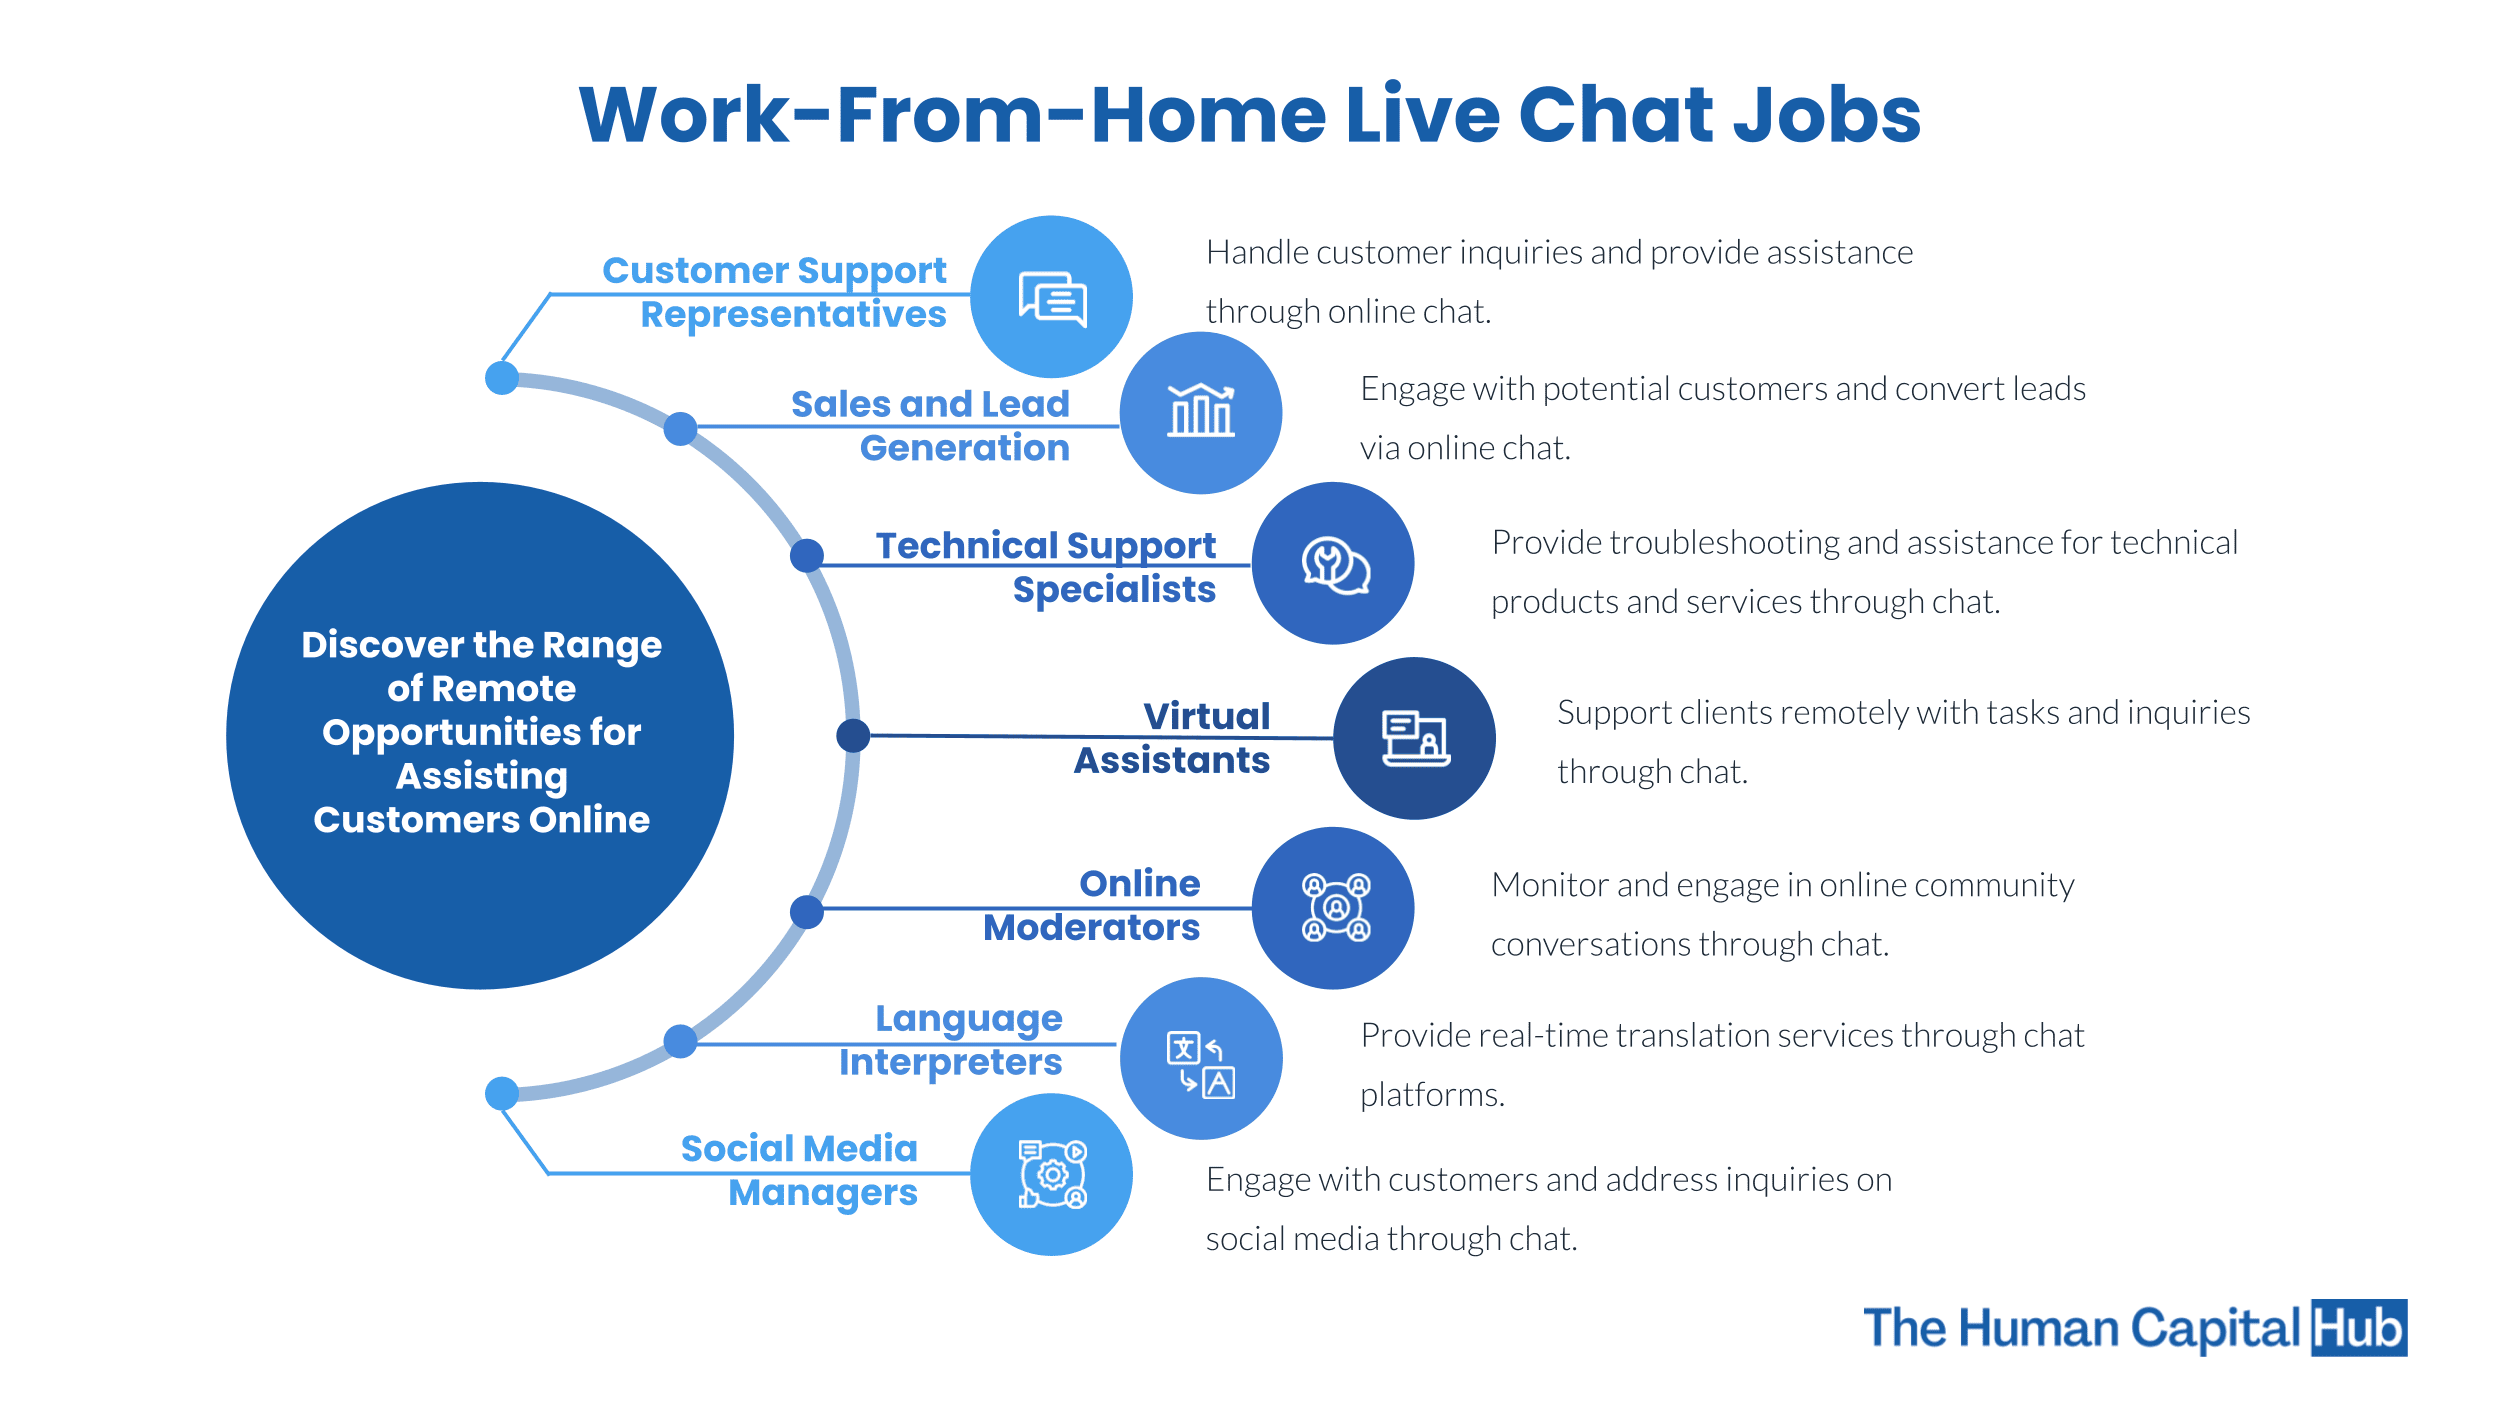 Work From Home Live Chat Jobs: Things You Need to Know